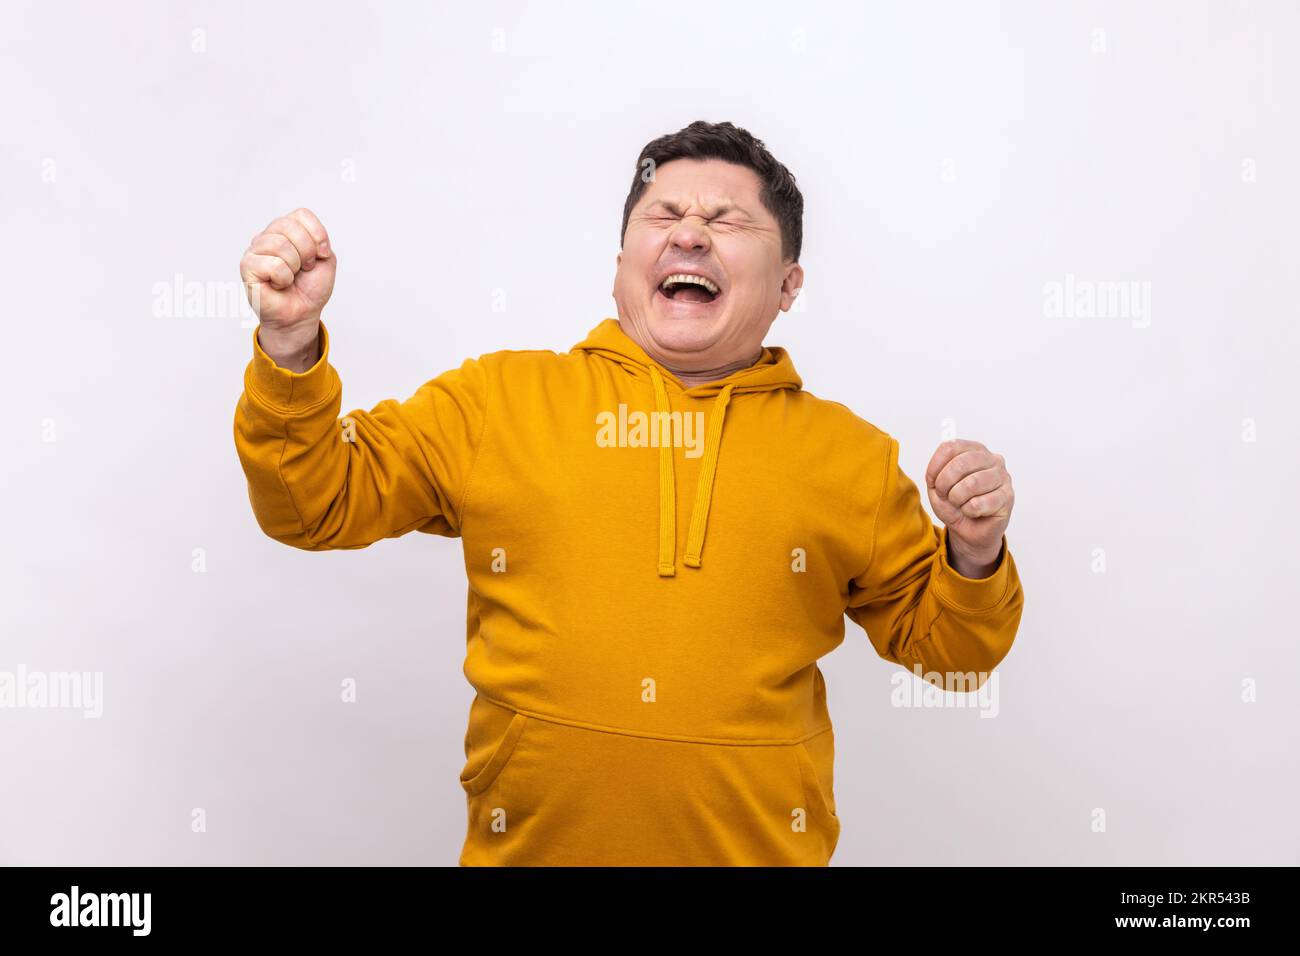 Overjoyed handsome middle aged man expressing winning gesture with raised fists and screaming, celebrating victory, wearing urban style hoodie. Indoor studio shot isolated on white background. Stock Photo